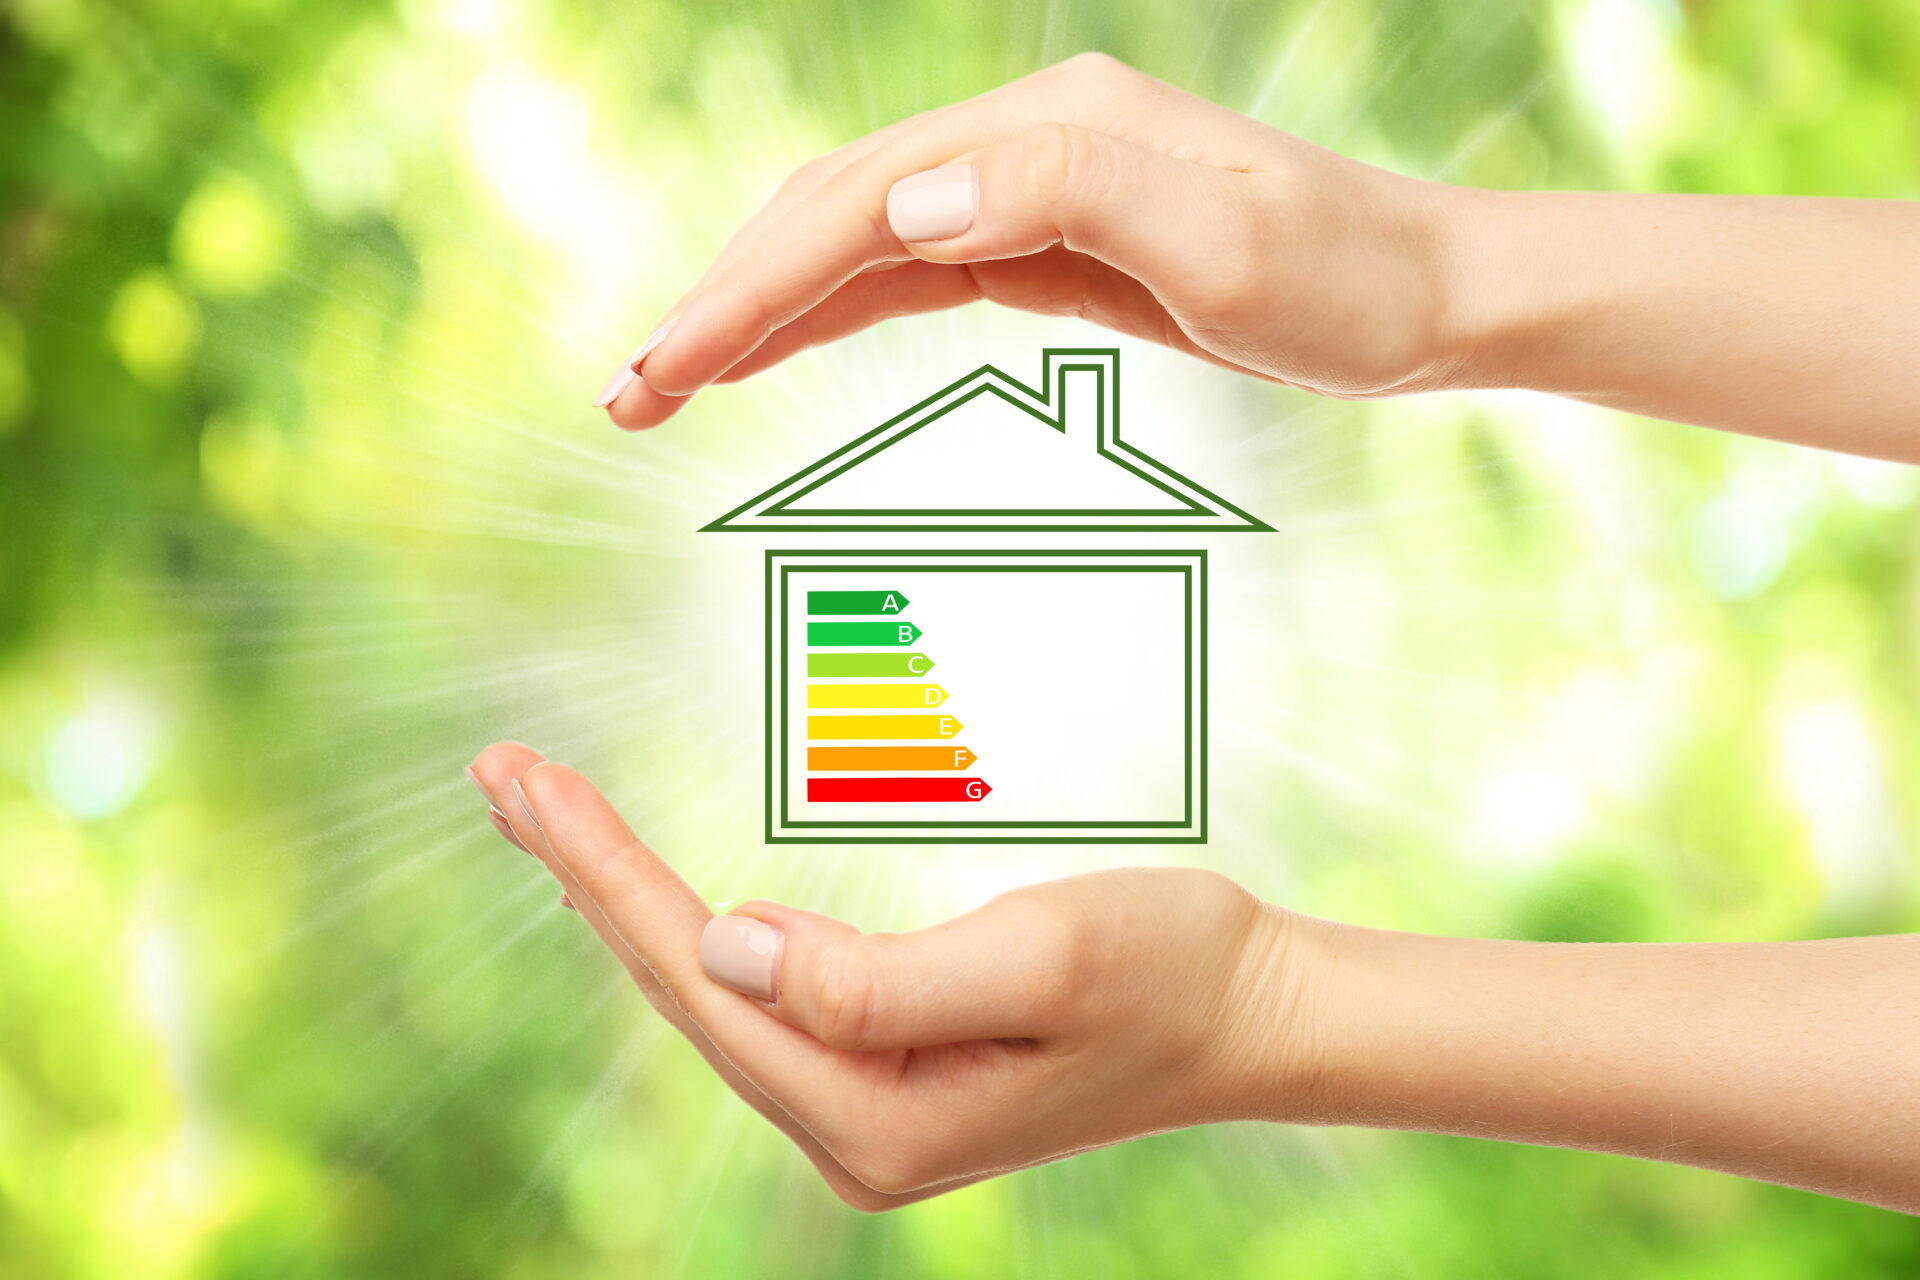 hands cupping a digital image of a home with yellow, green, and red lines showing energy efficiency levels